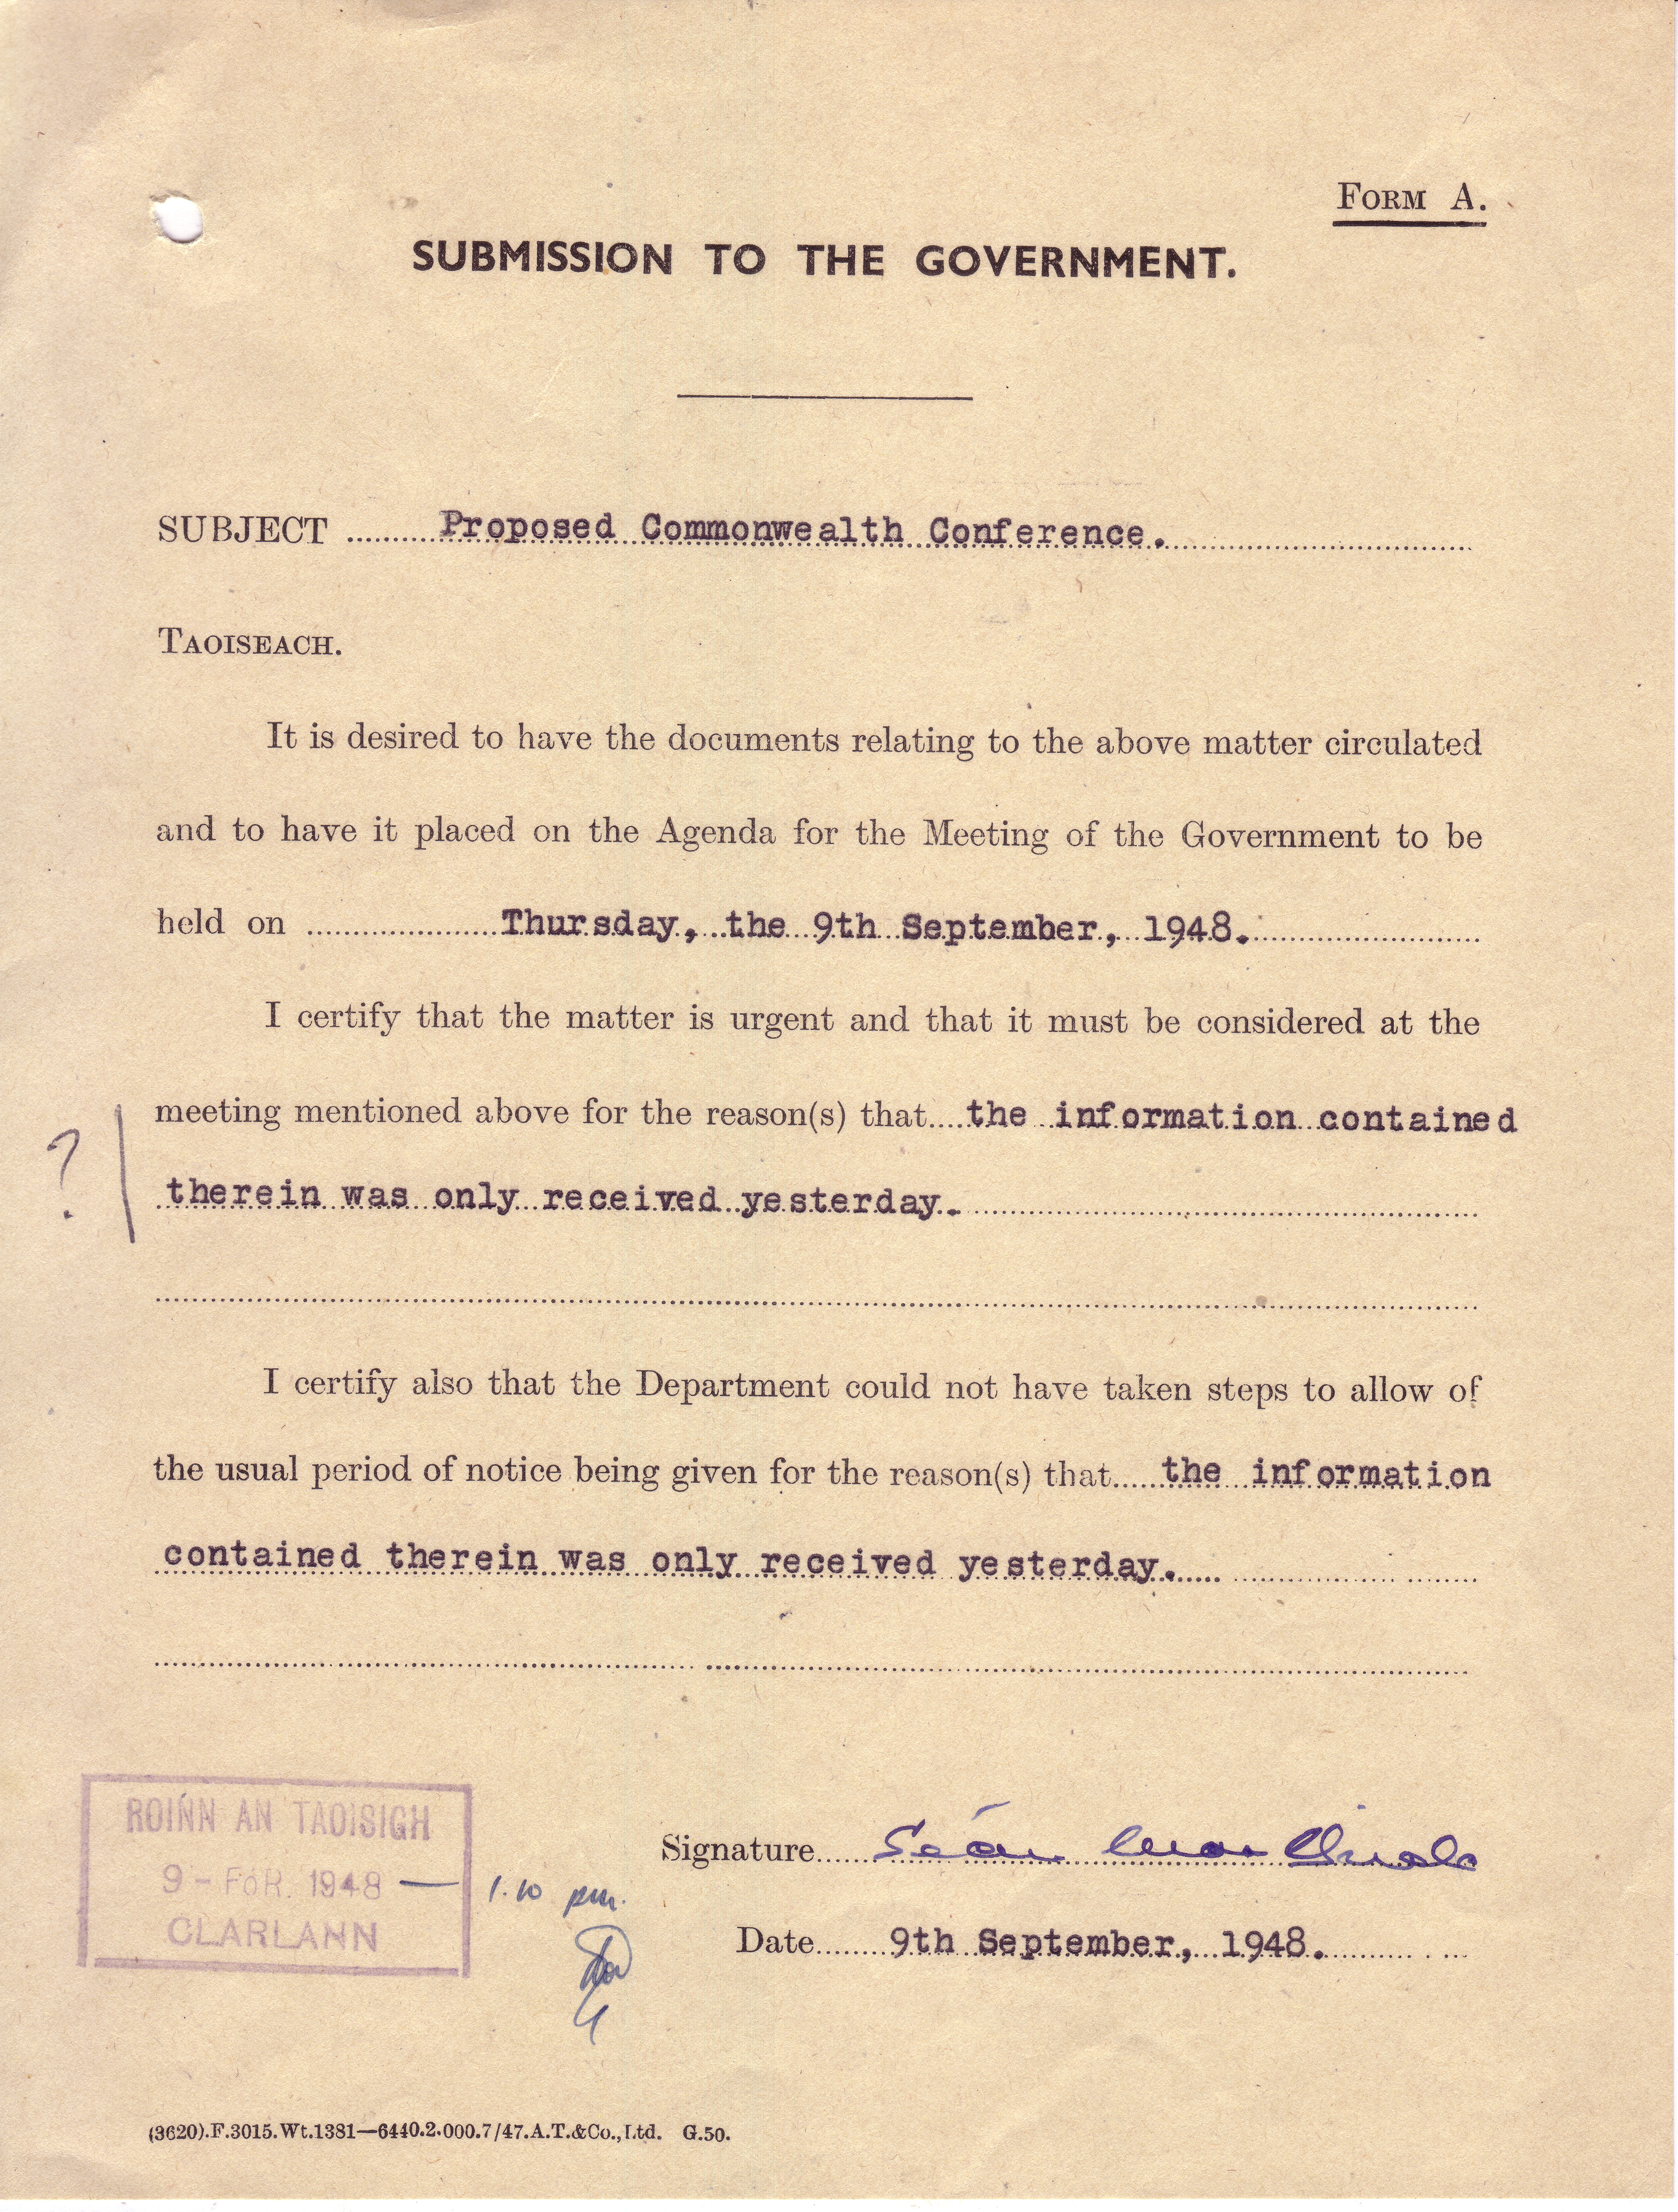 Submission to the Government (Dublin)'Proposed Commonwealth Conference'